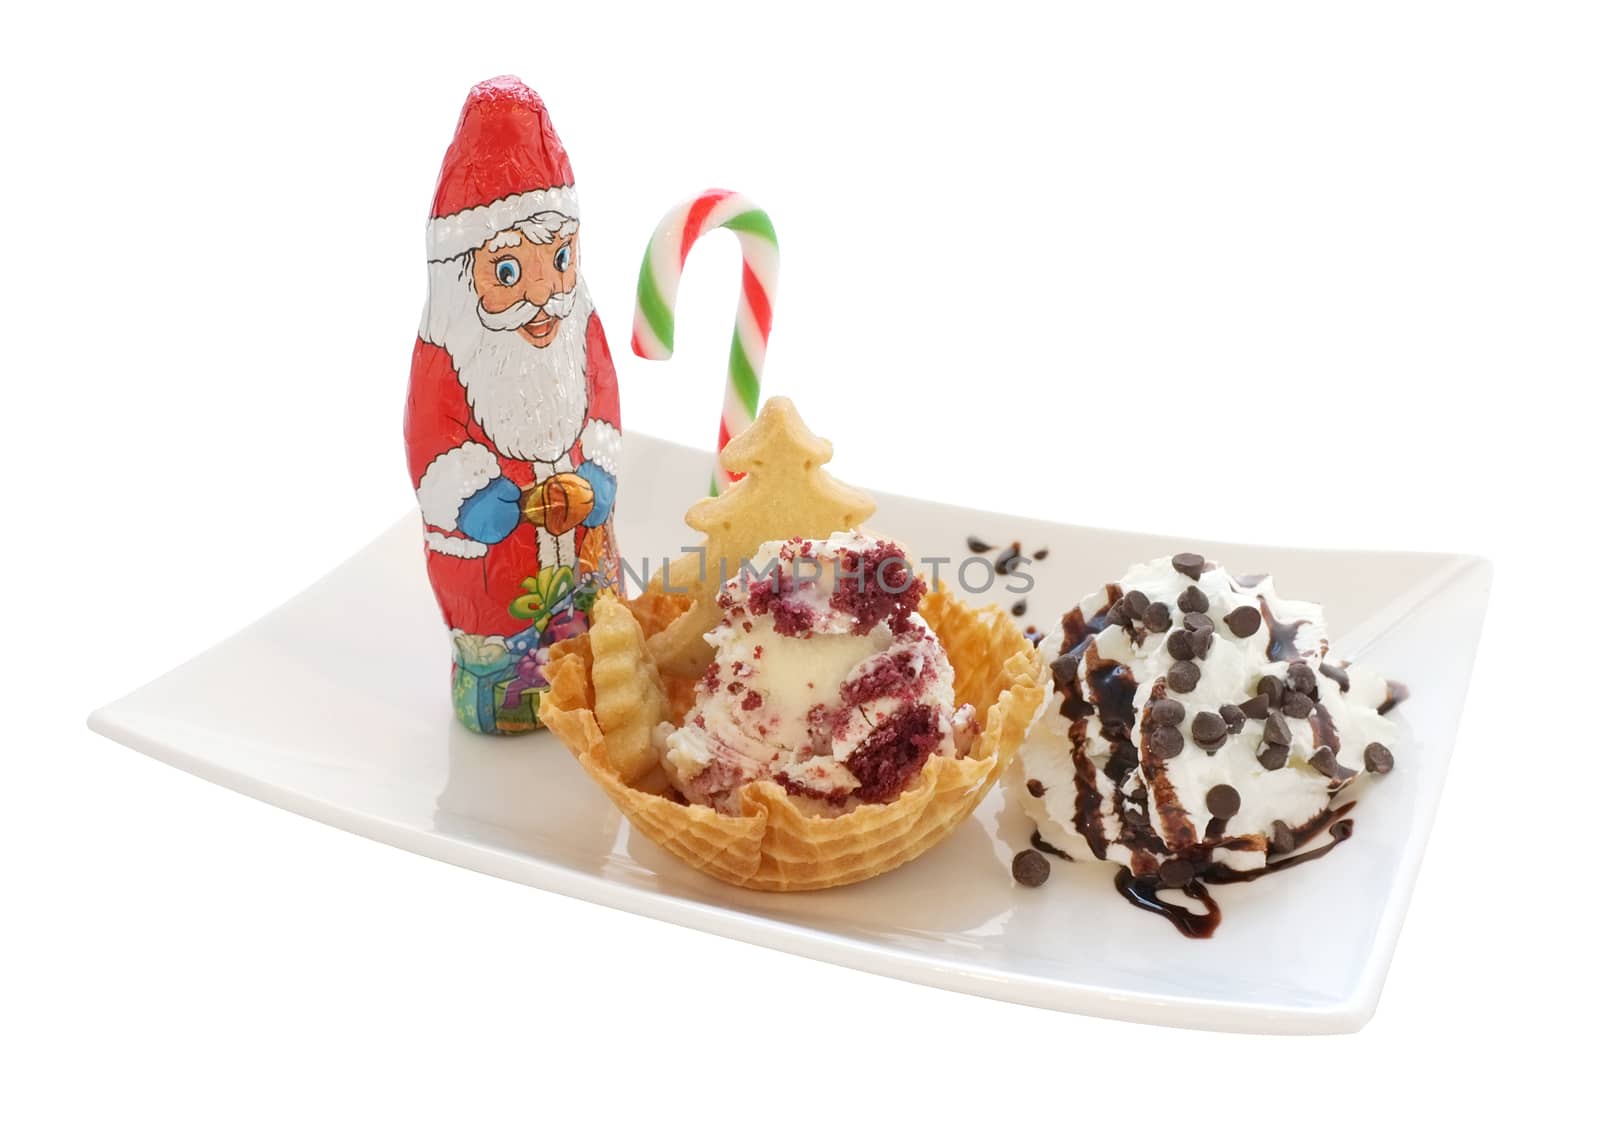 Ice cream in wafer cone / bowl with christmas decoration by Hepjam